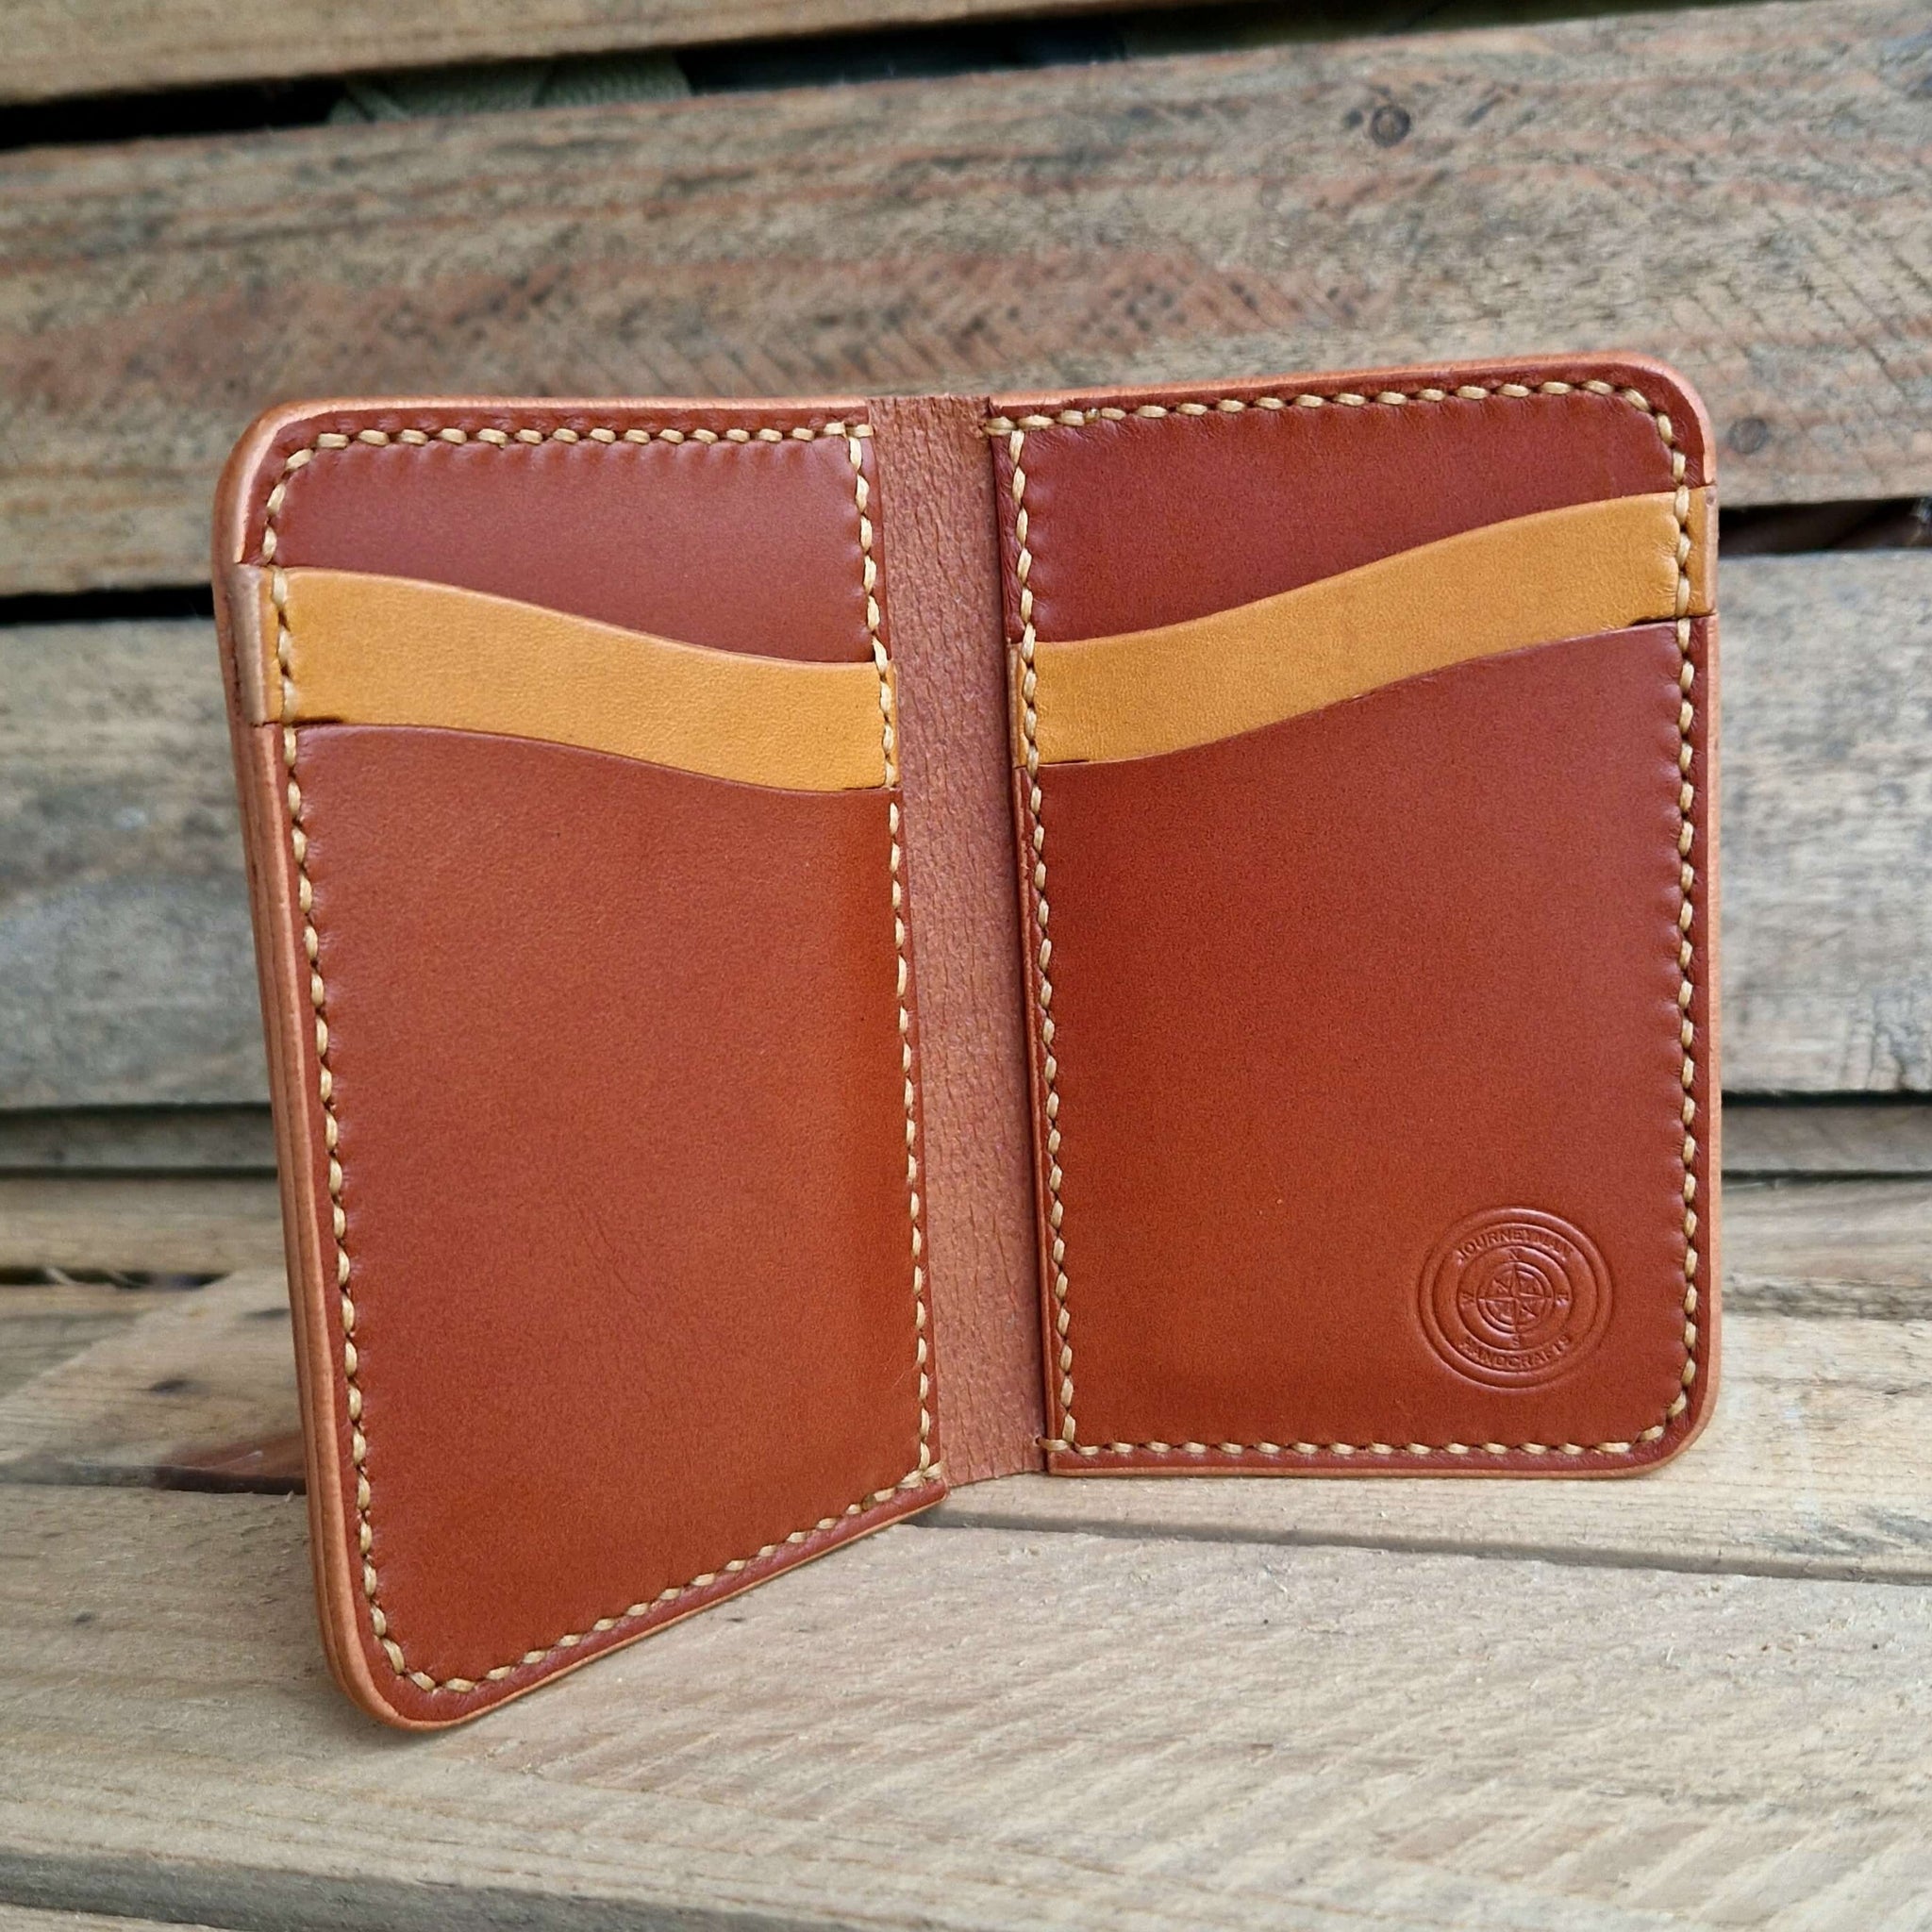 Hand stitched leather wallet in tan brown, with a lighter brown accent colour